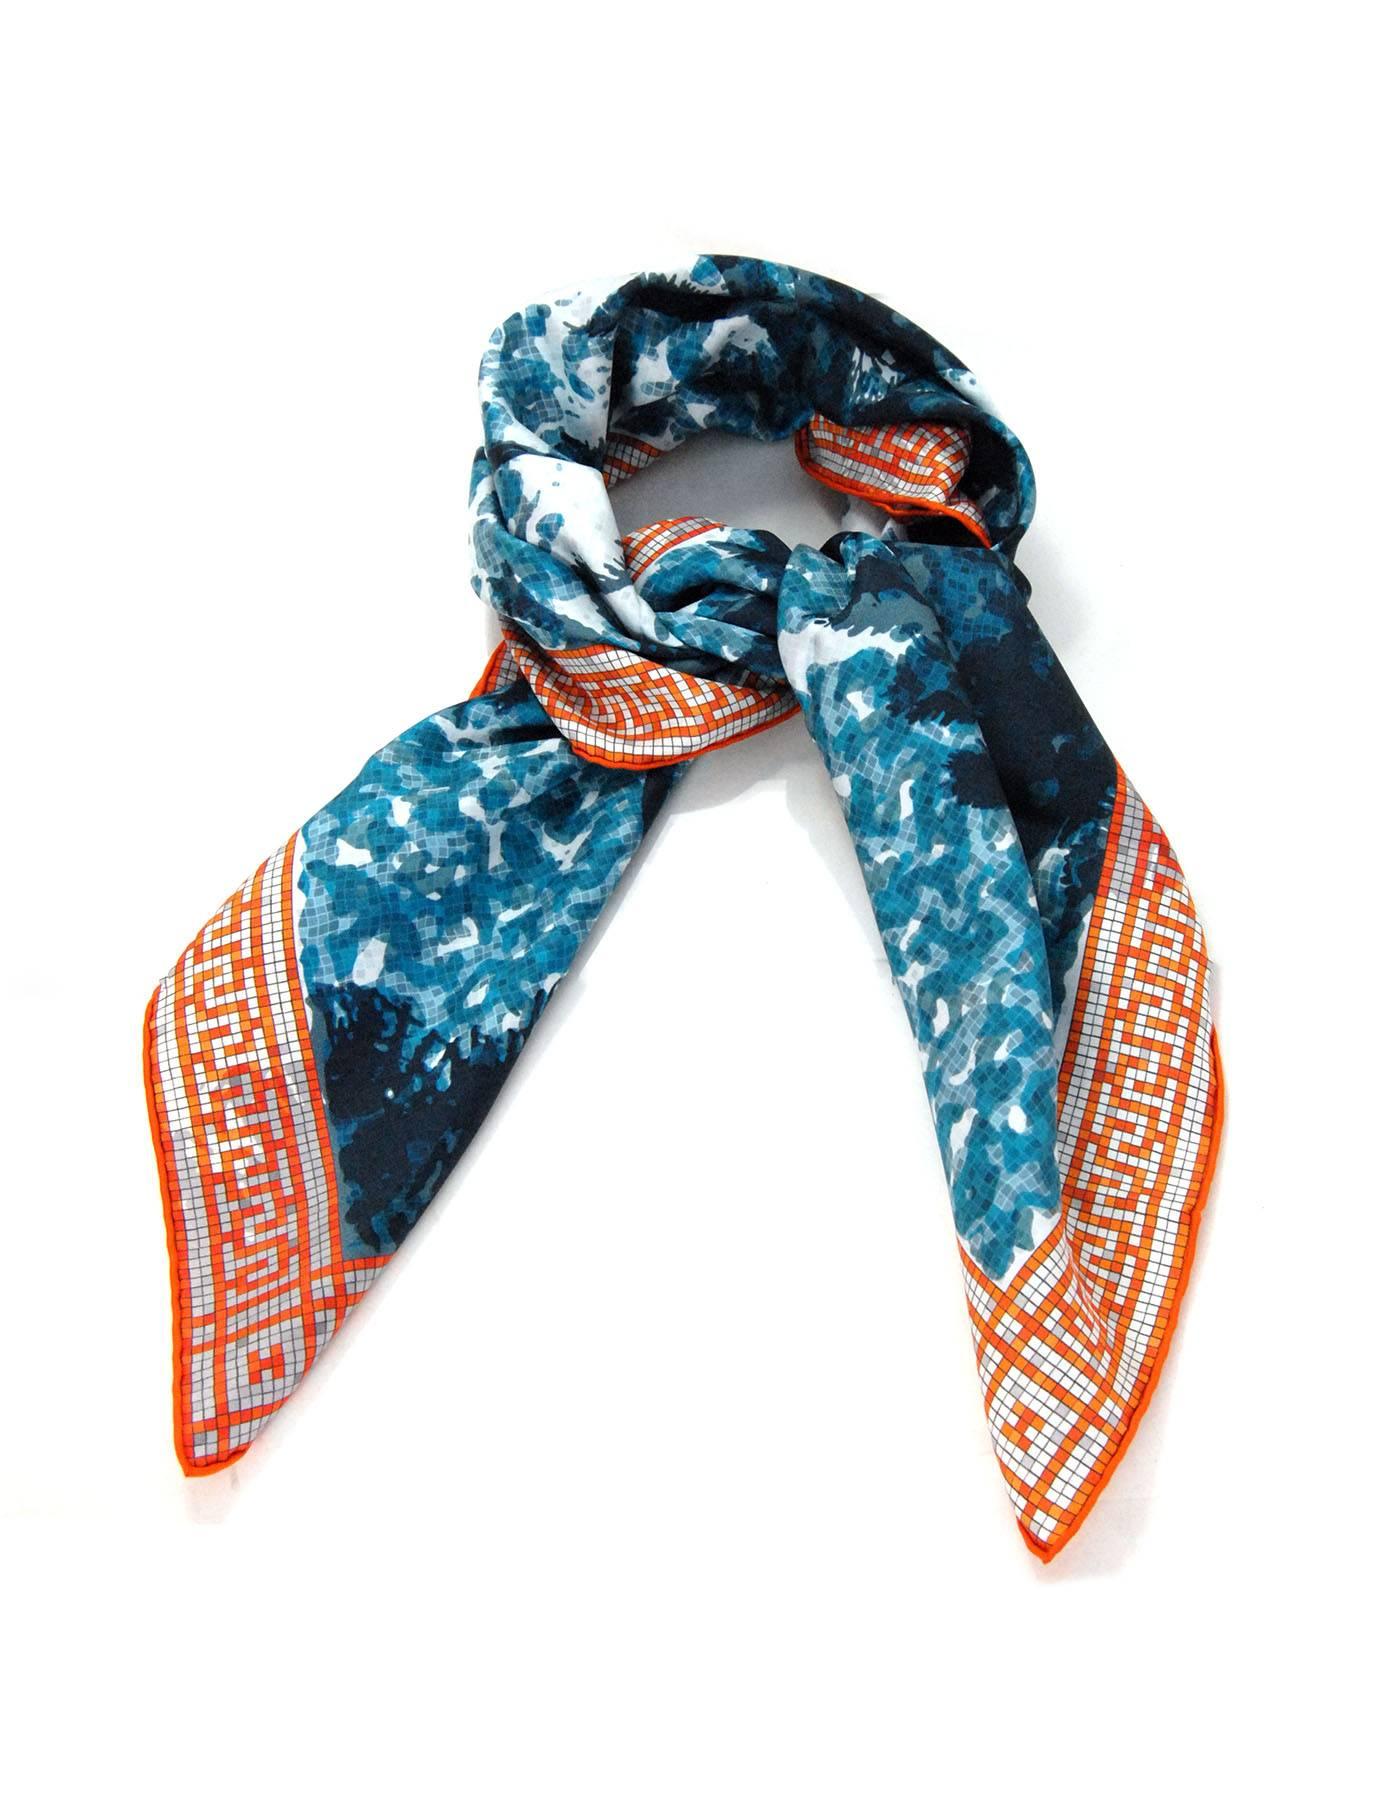 Hermes Limited Edition Hermes A Beverly Hills Silk 90cm Scarf NWT

Made In: France
Color: Blue, orange, white
Composition: 100% Silk
Retail Price: $395 + tax
Overall Condition: Excellent pre-owned condition, NWT
Included: Hermes box,